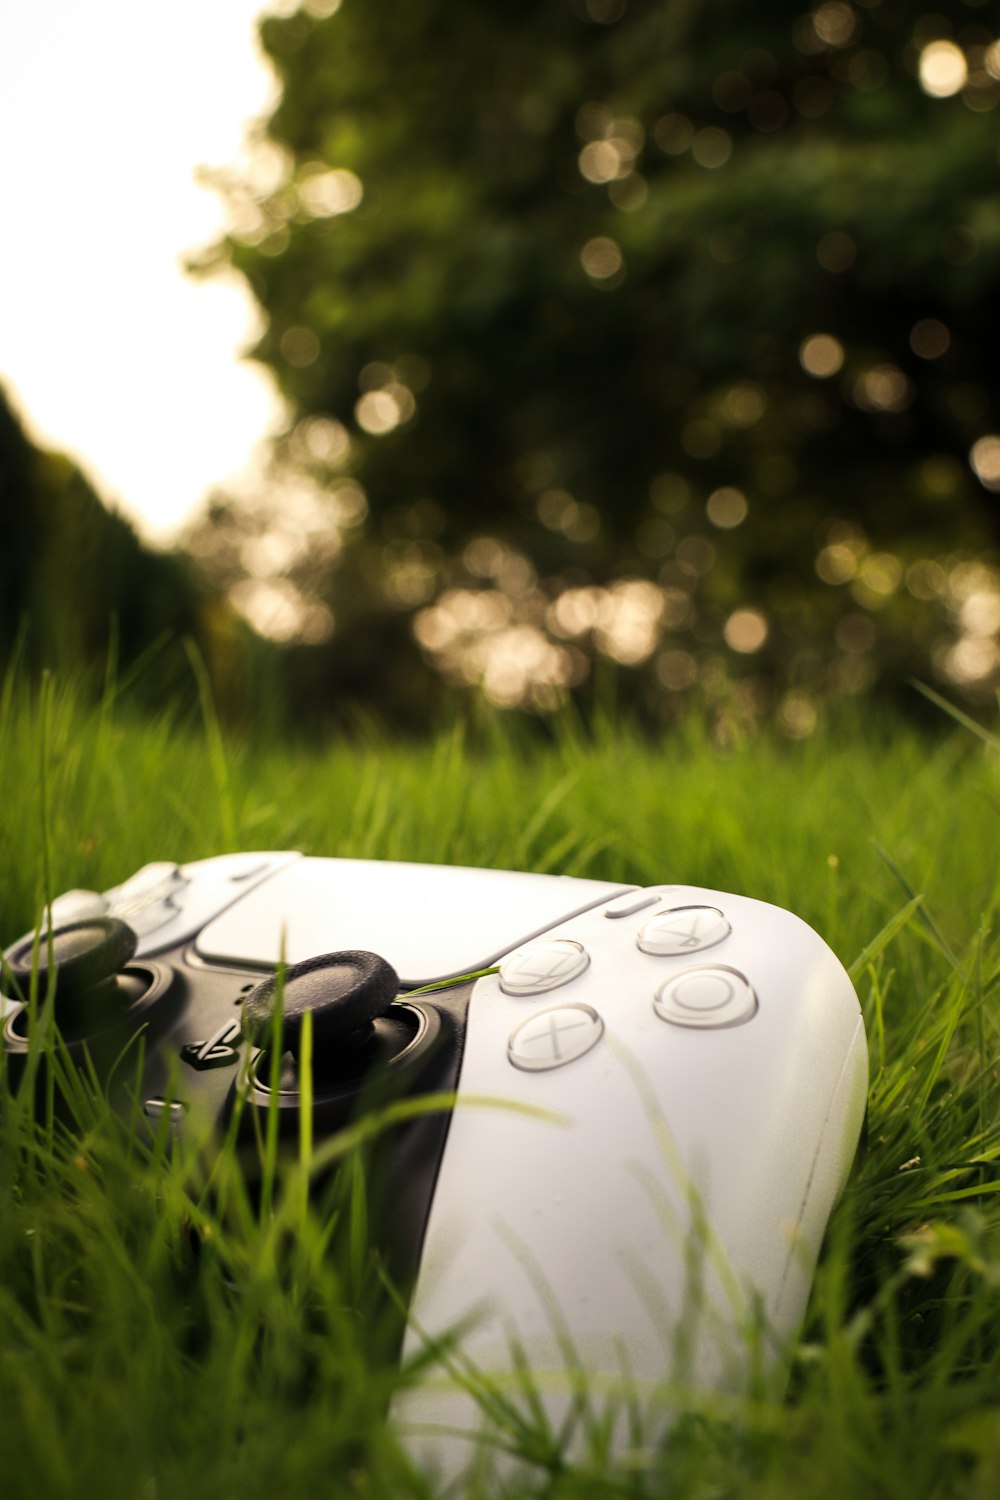 a wii remote laying in the grass with trees in the background